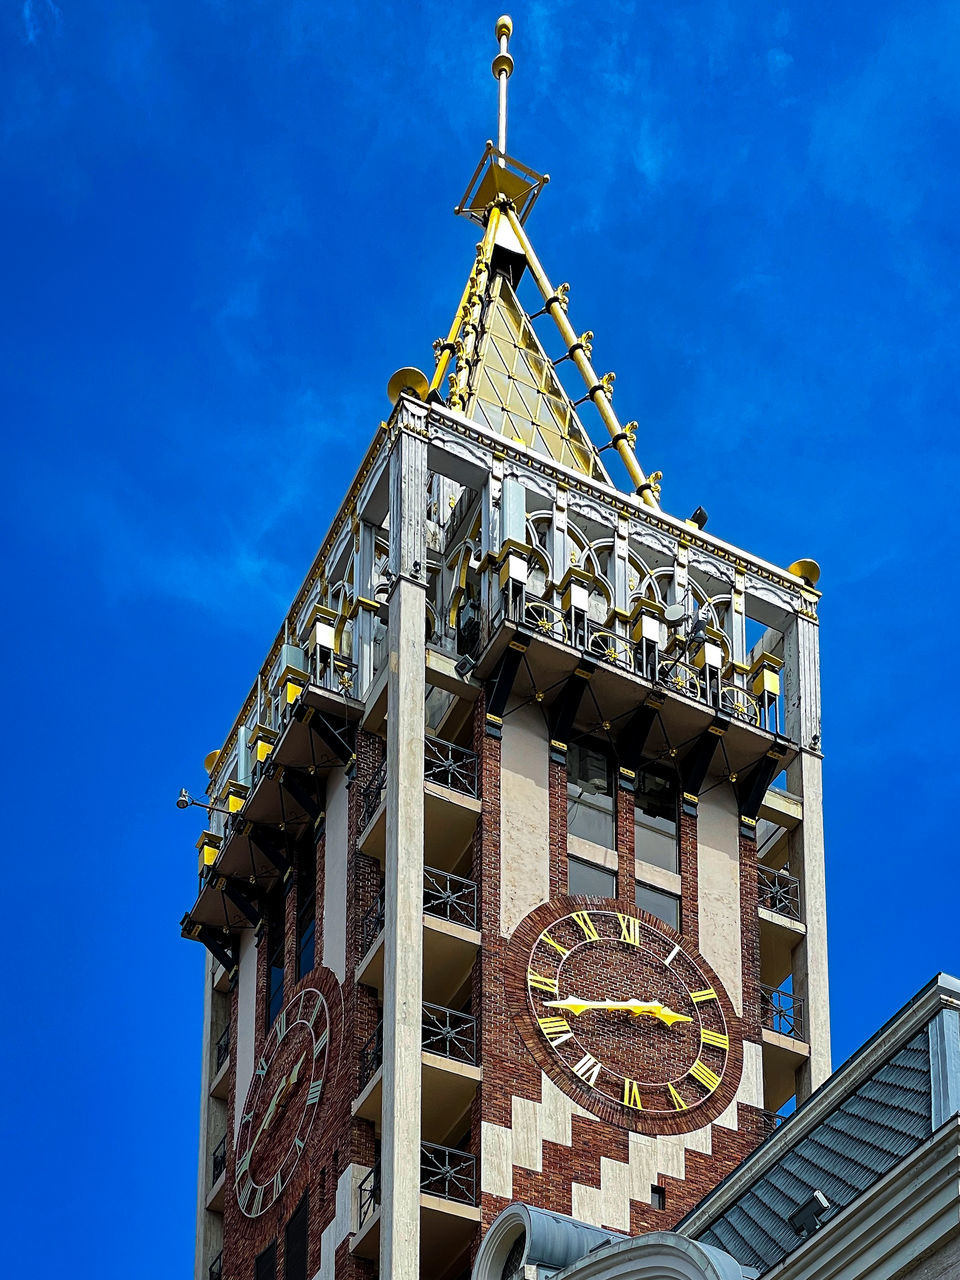 LOW ANGLE VIEW OF CLOCK TOWER AMIDST BUILDINGS AGAINST SKY